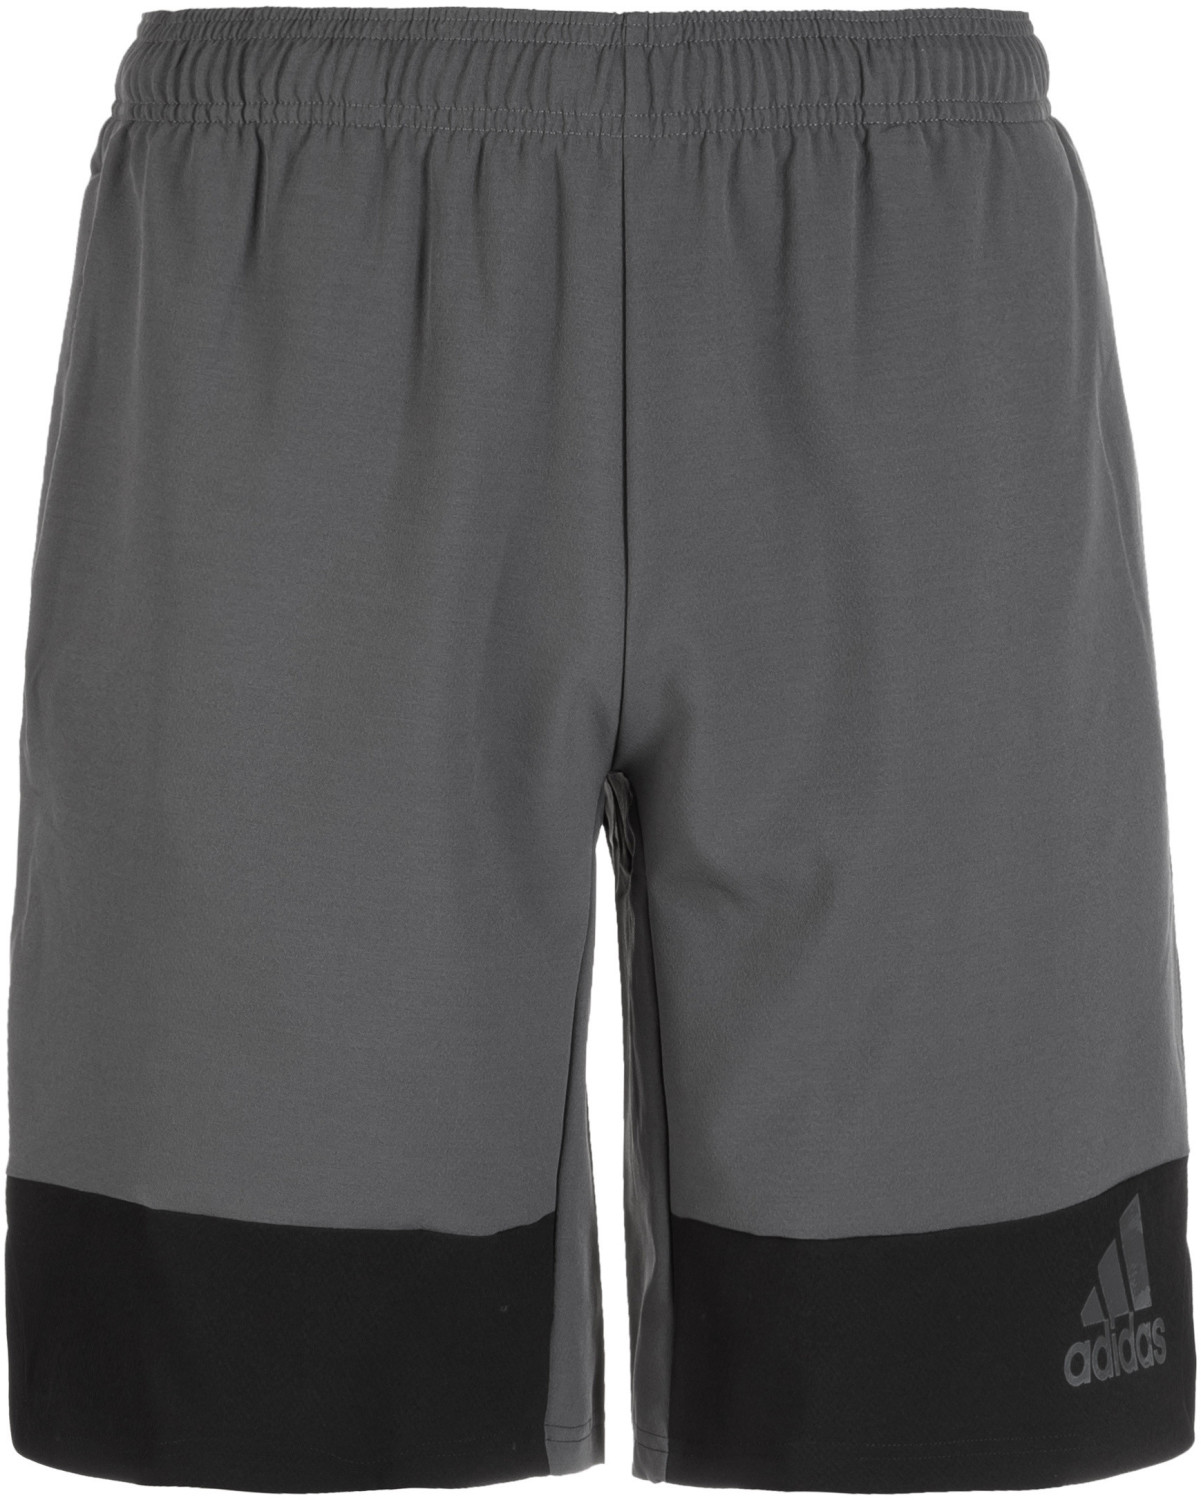 Adidas 4KRFT Tech 10-inch Elevated Shorts